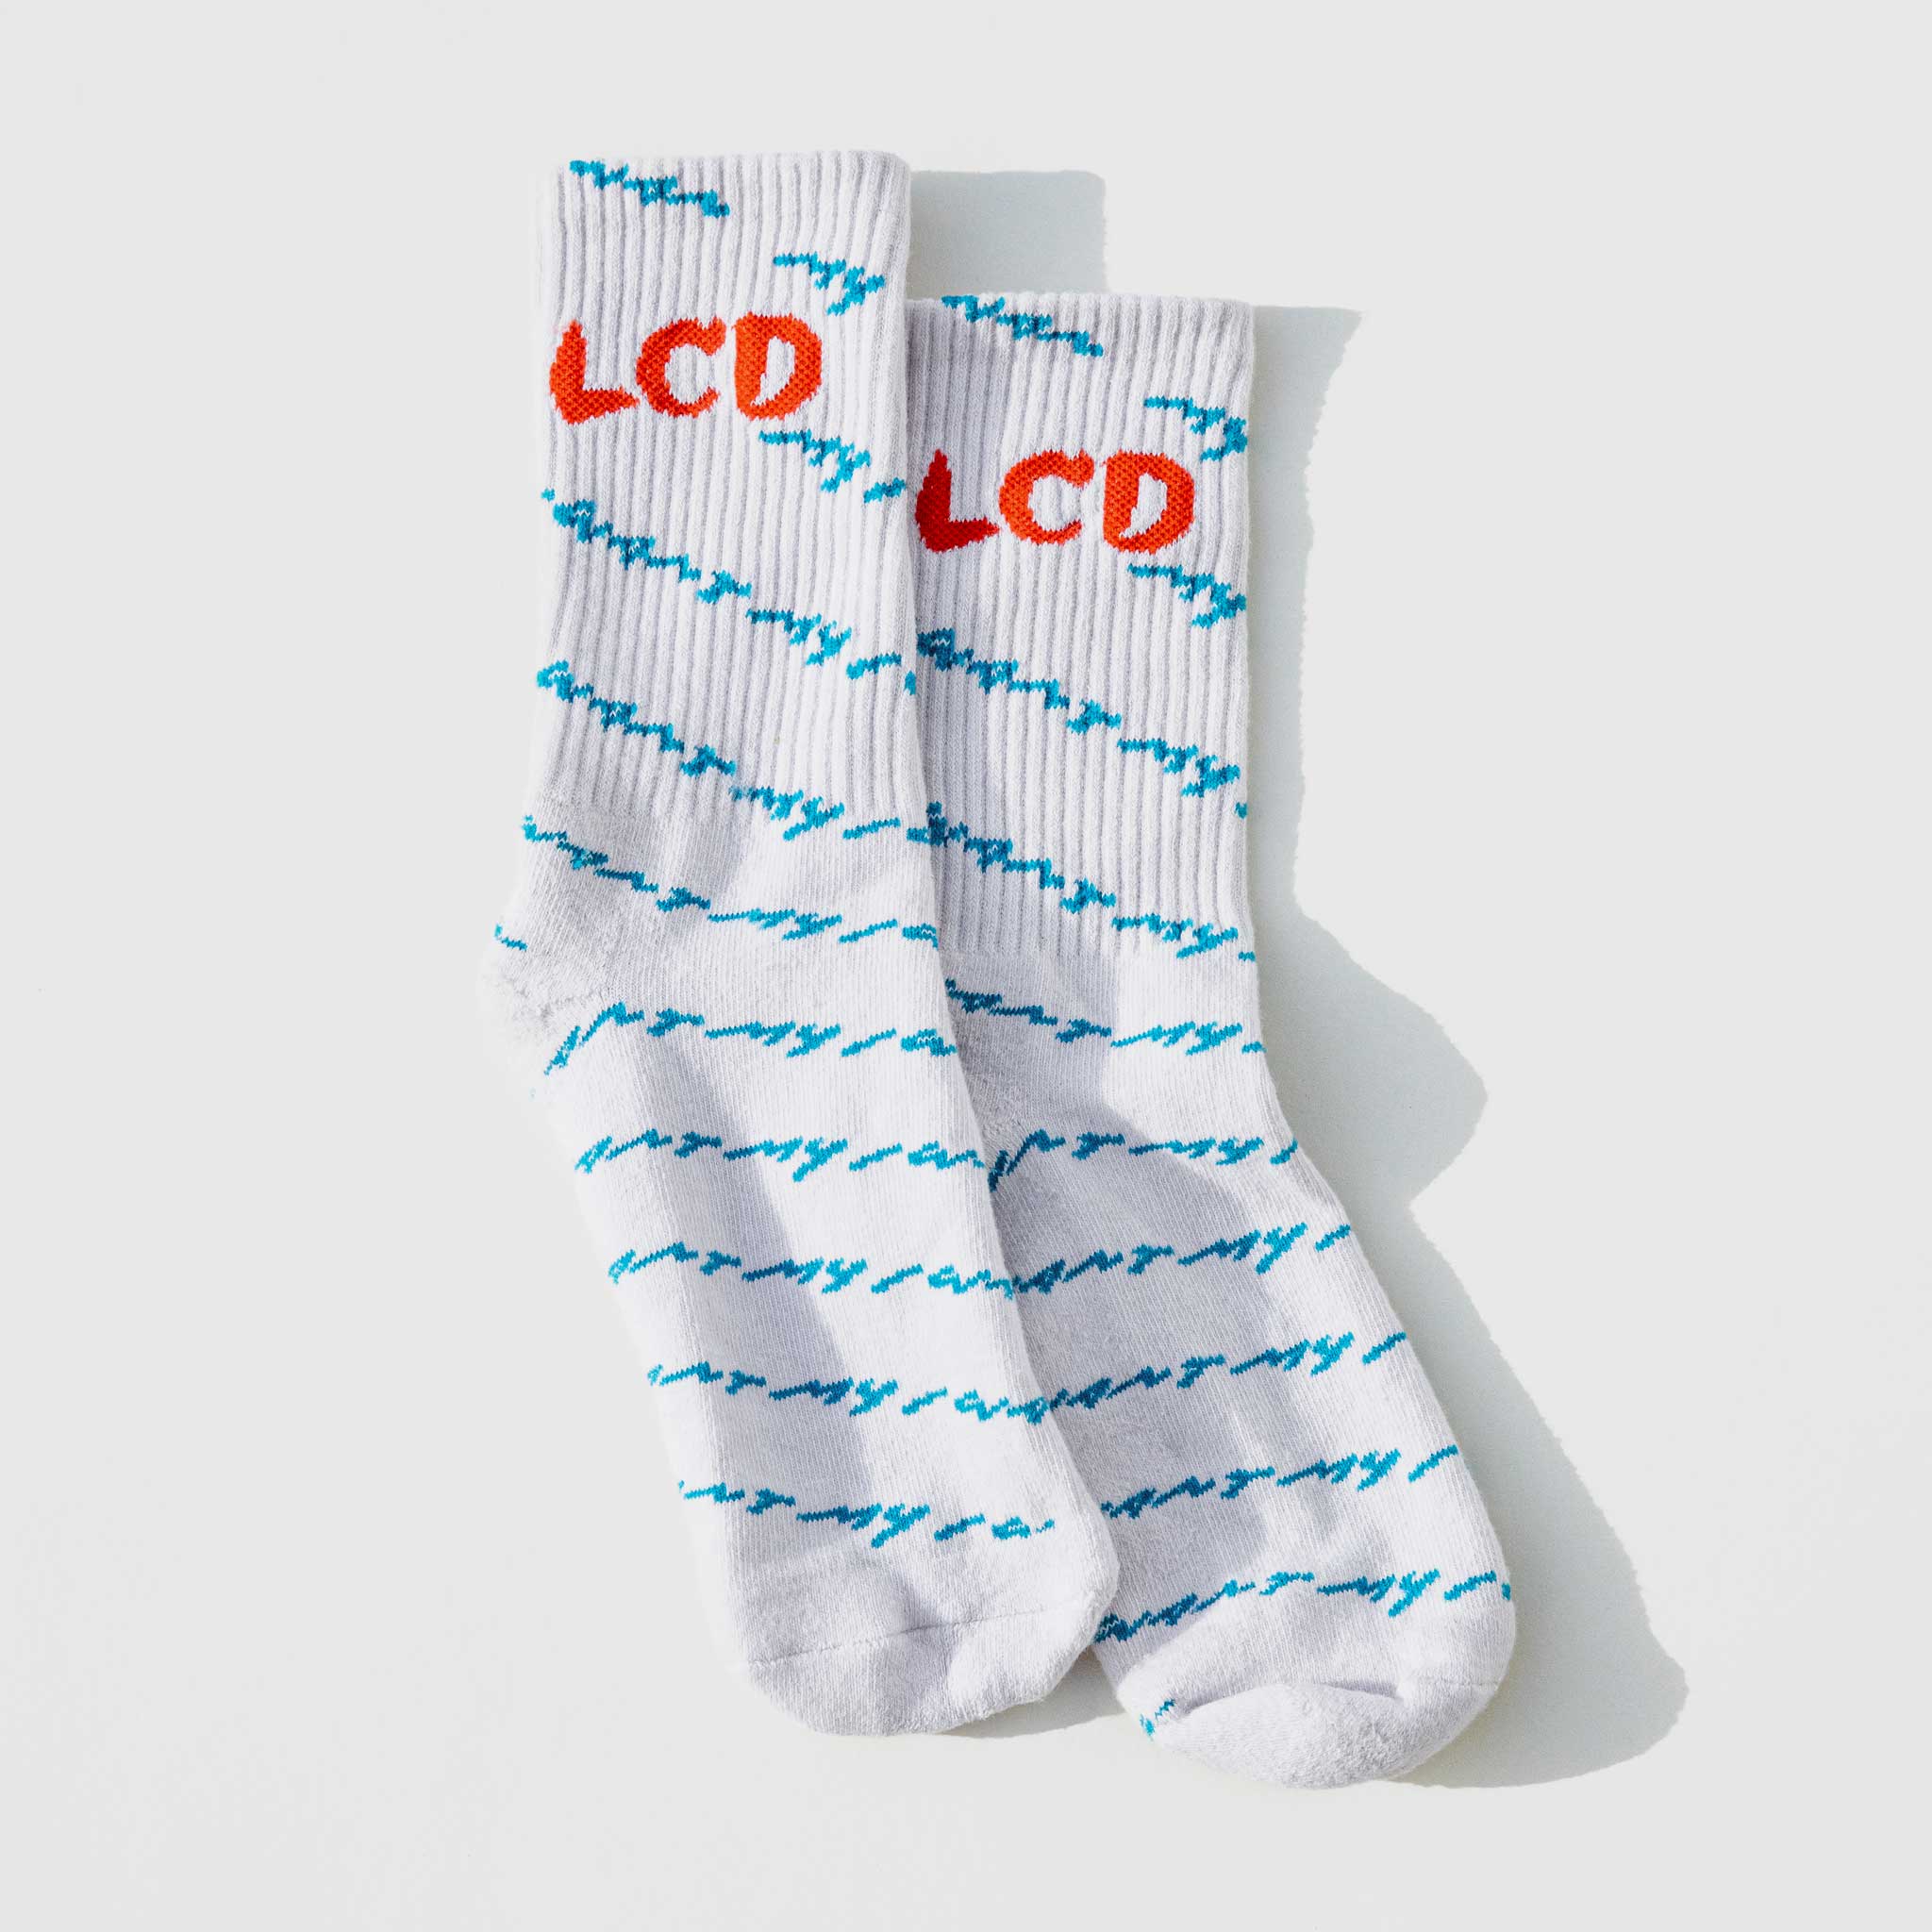 Close detail photo of the LCD10 Motto Crew Socks.